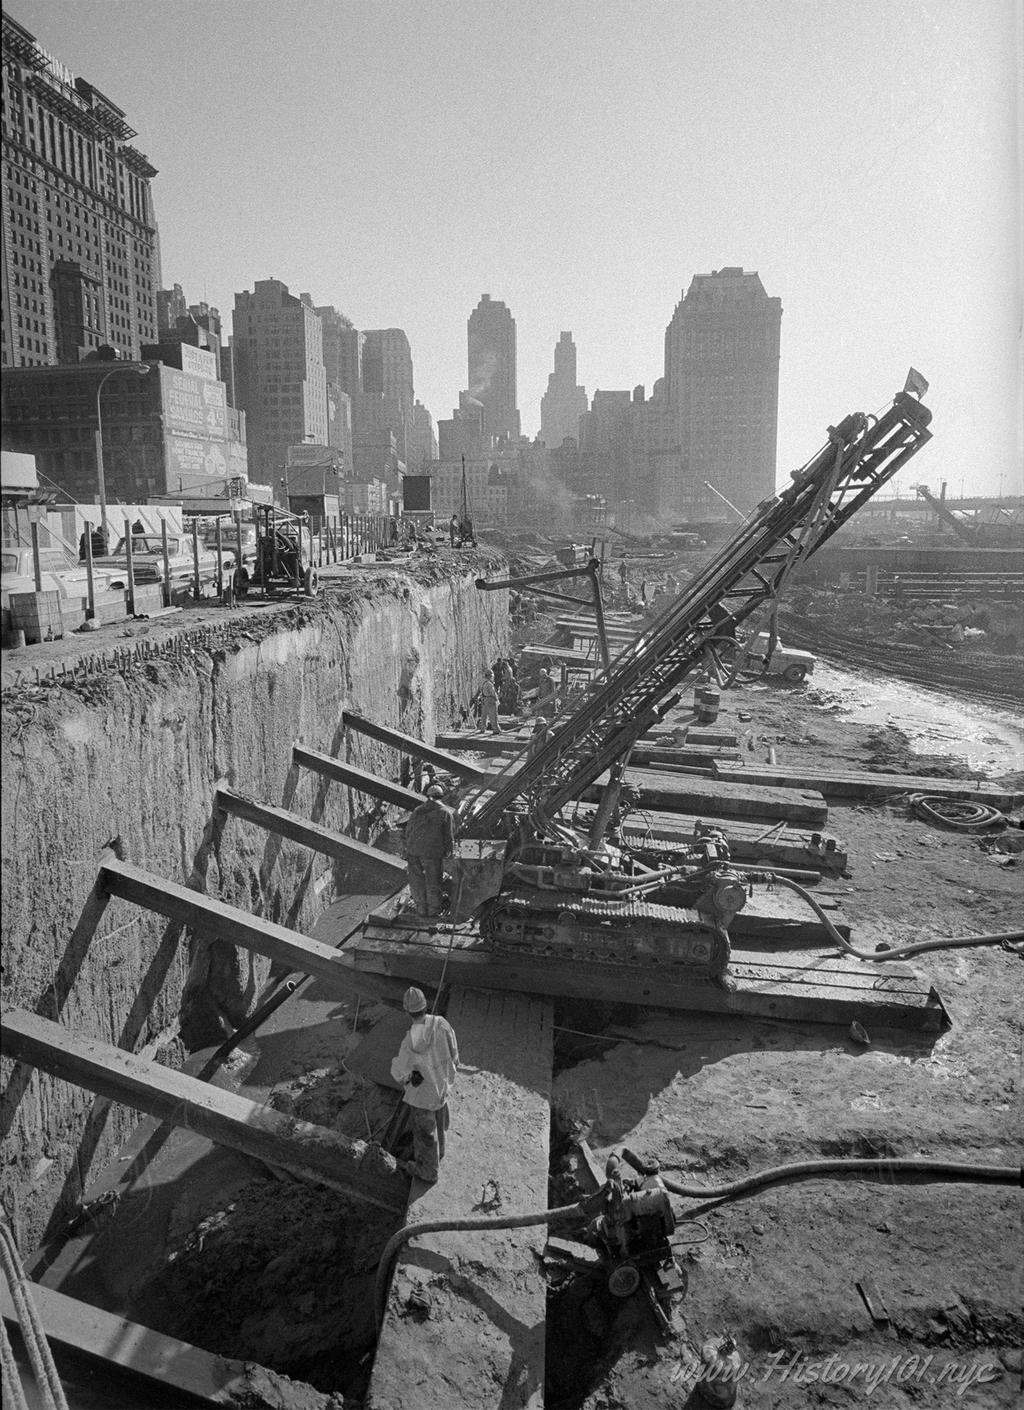 Photograph showing wall supports for the foundations of the World Trade Center.